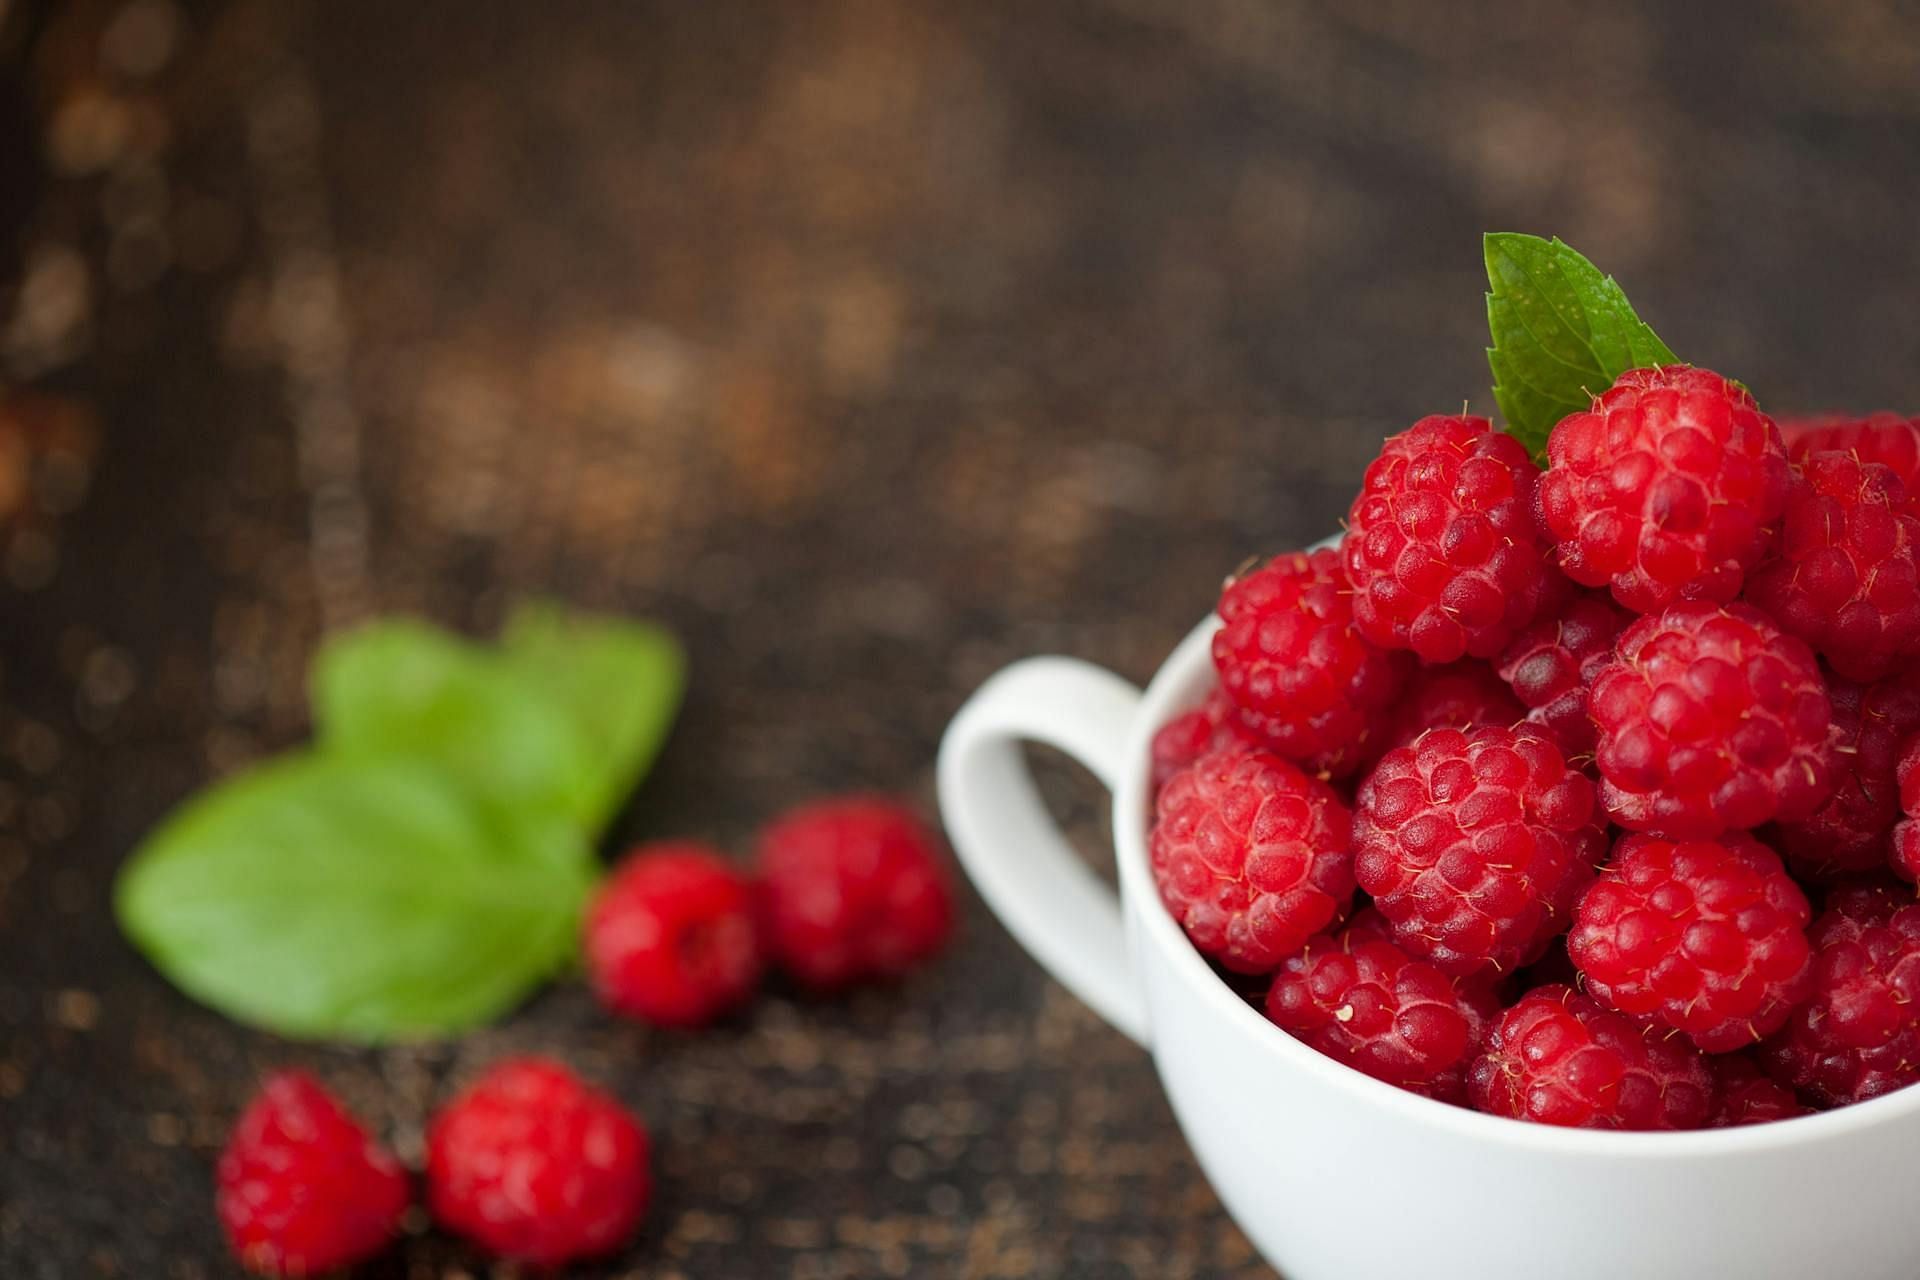 Raspberries are a good addition to your oatmeal (Image via Pexels/ Robert Bogdan)